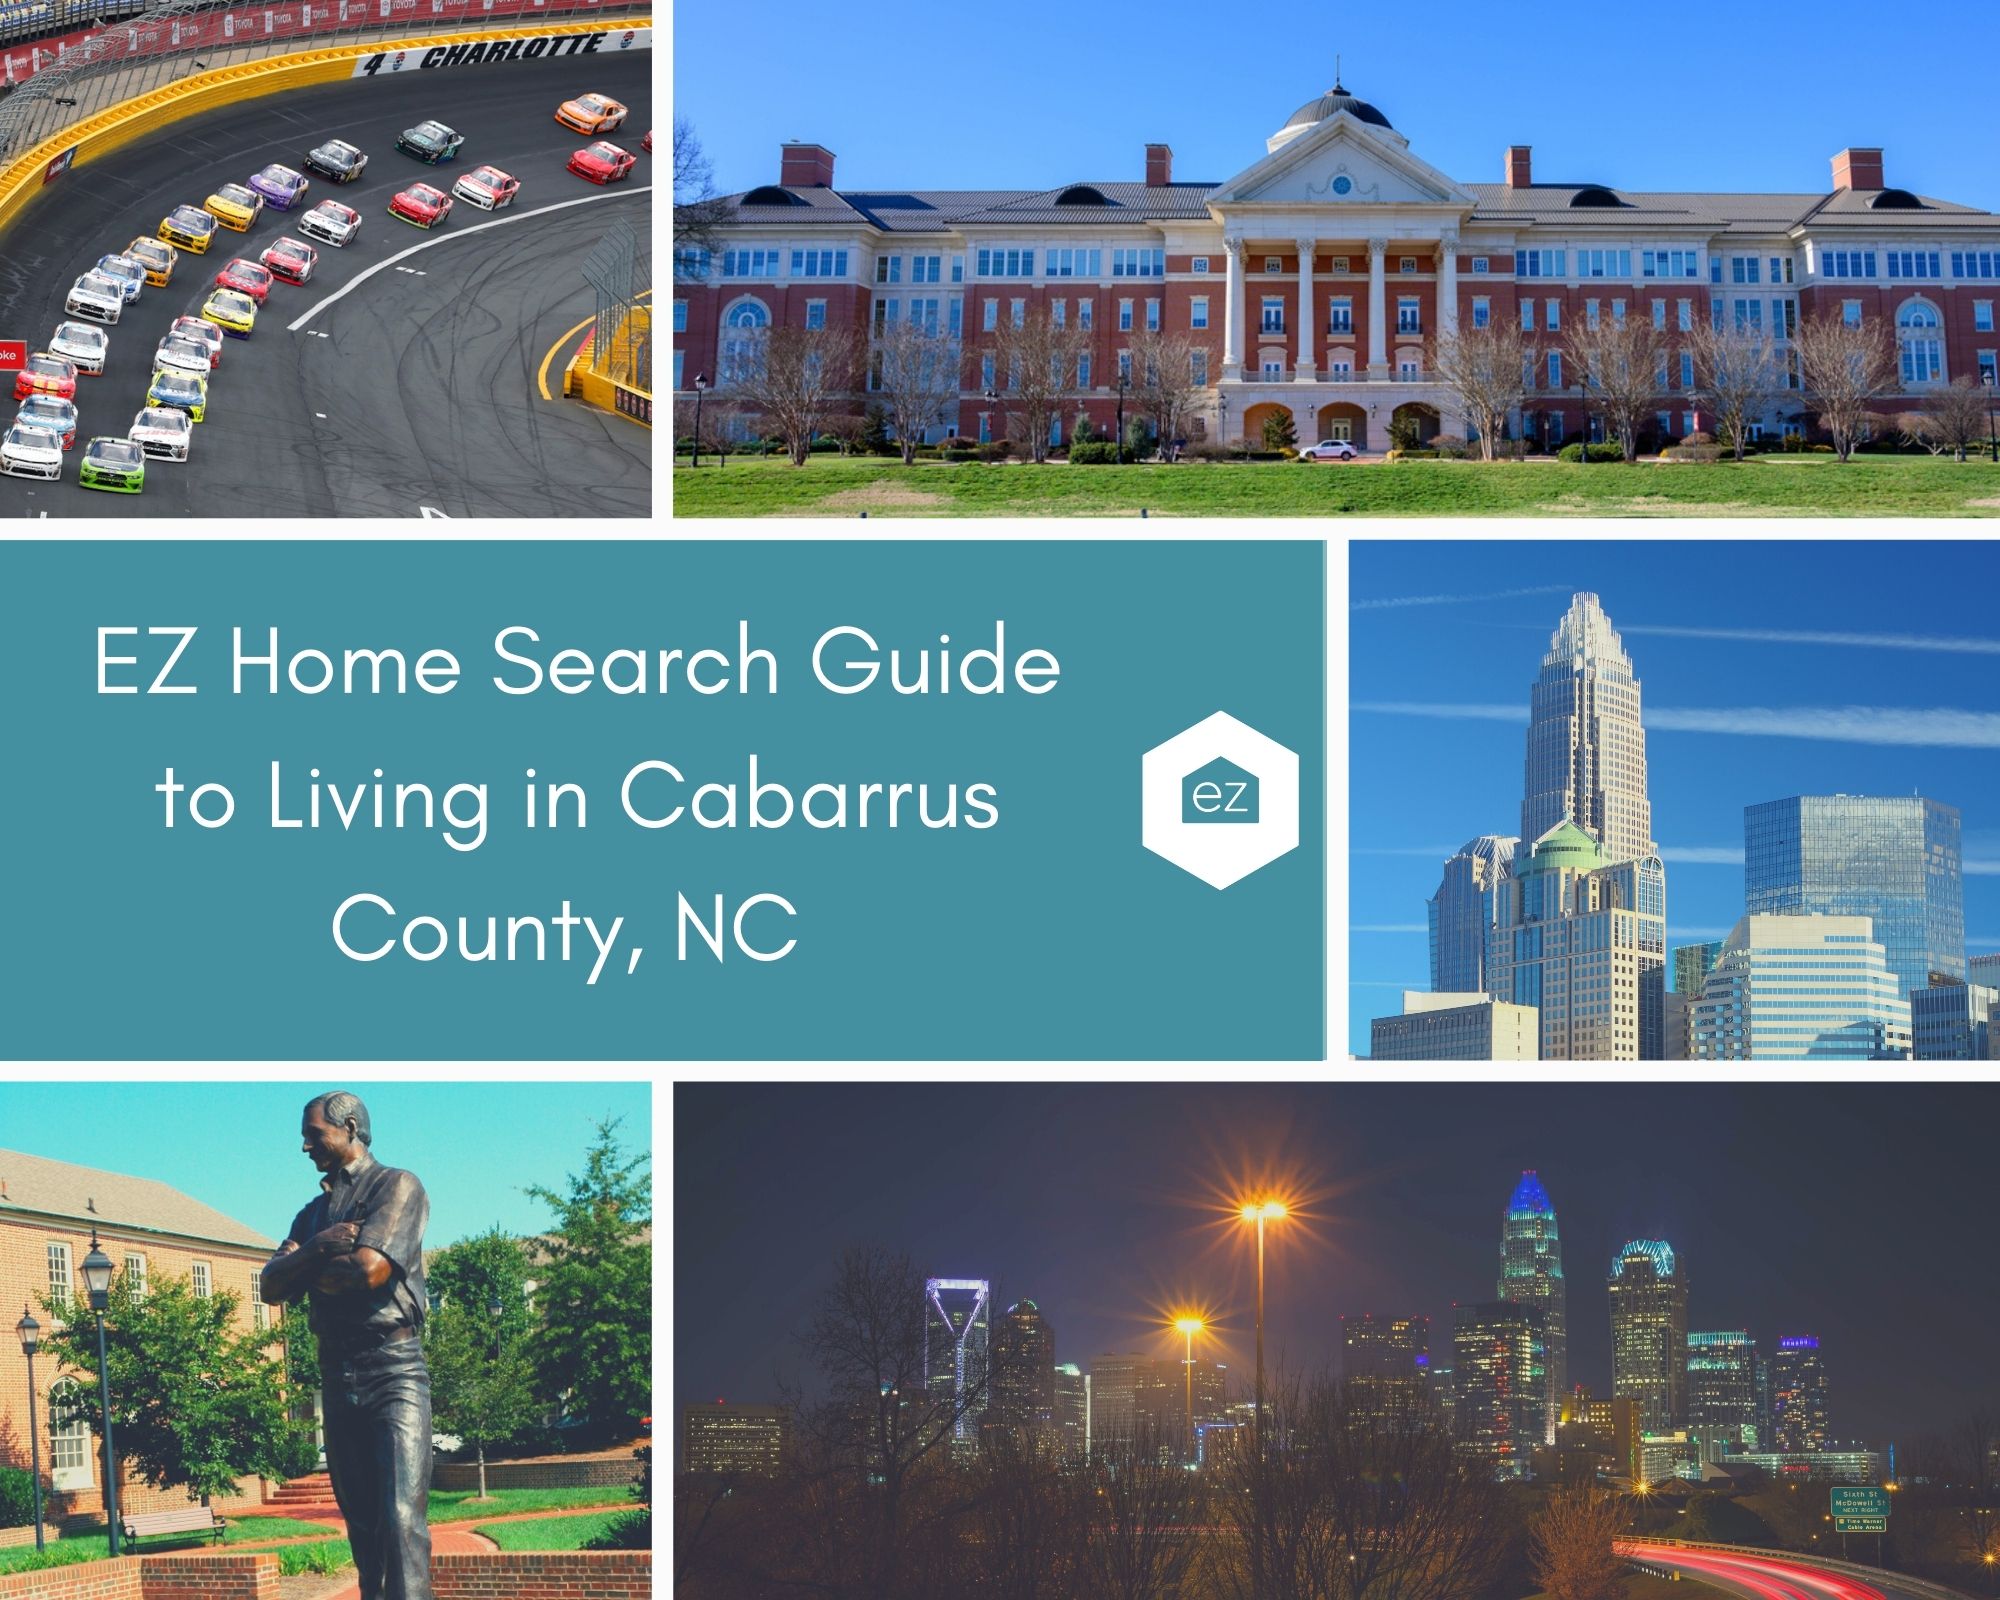 EZ Home Search Guide to Living in Cabarrus County NC